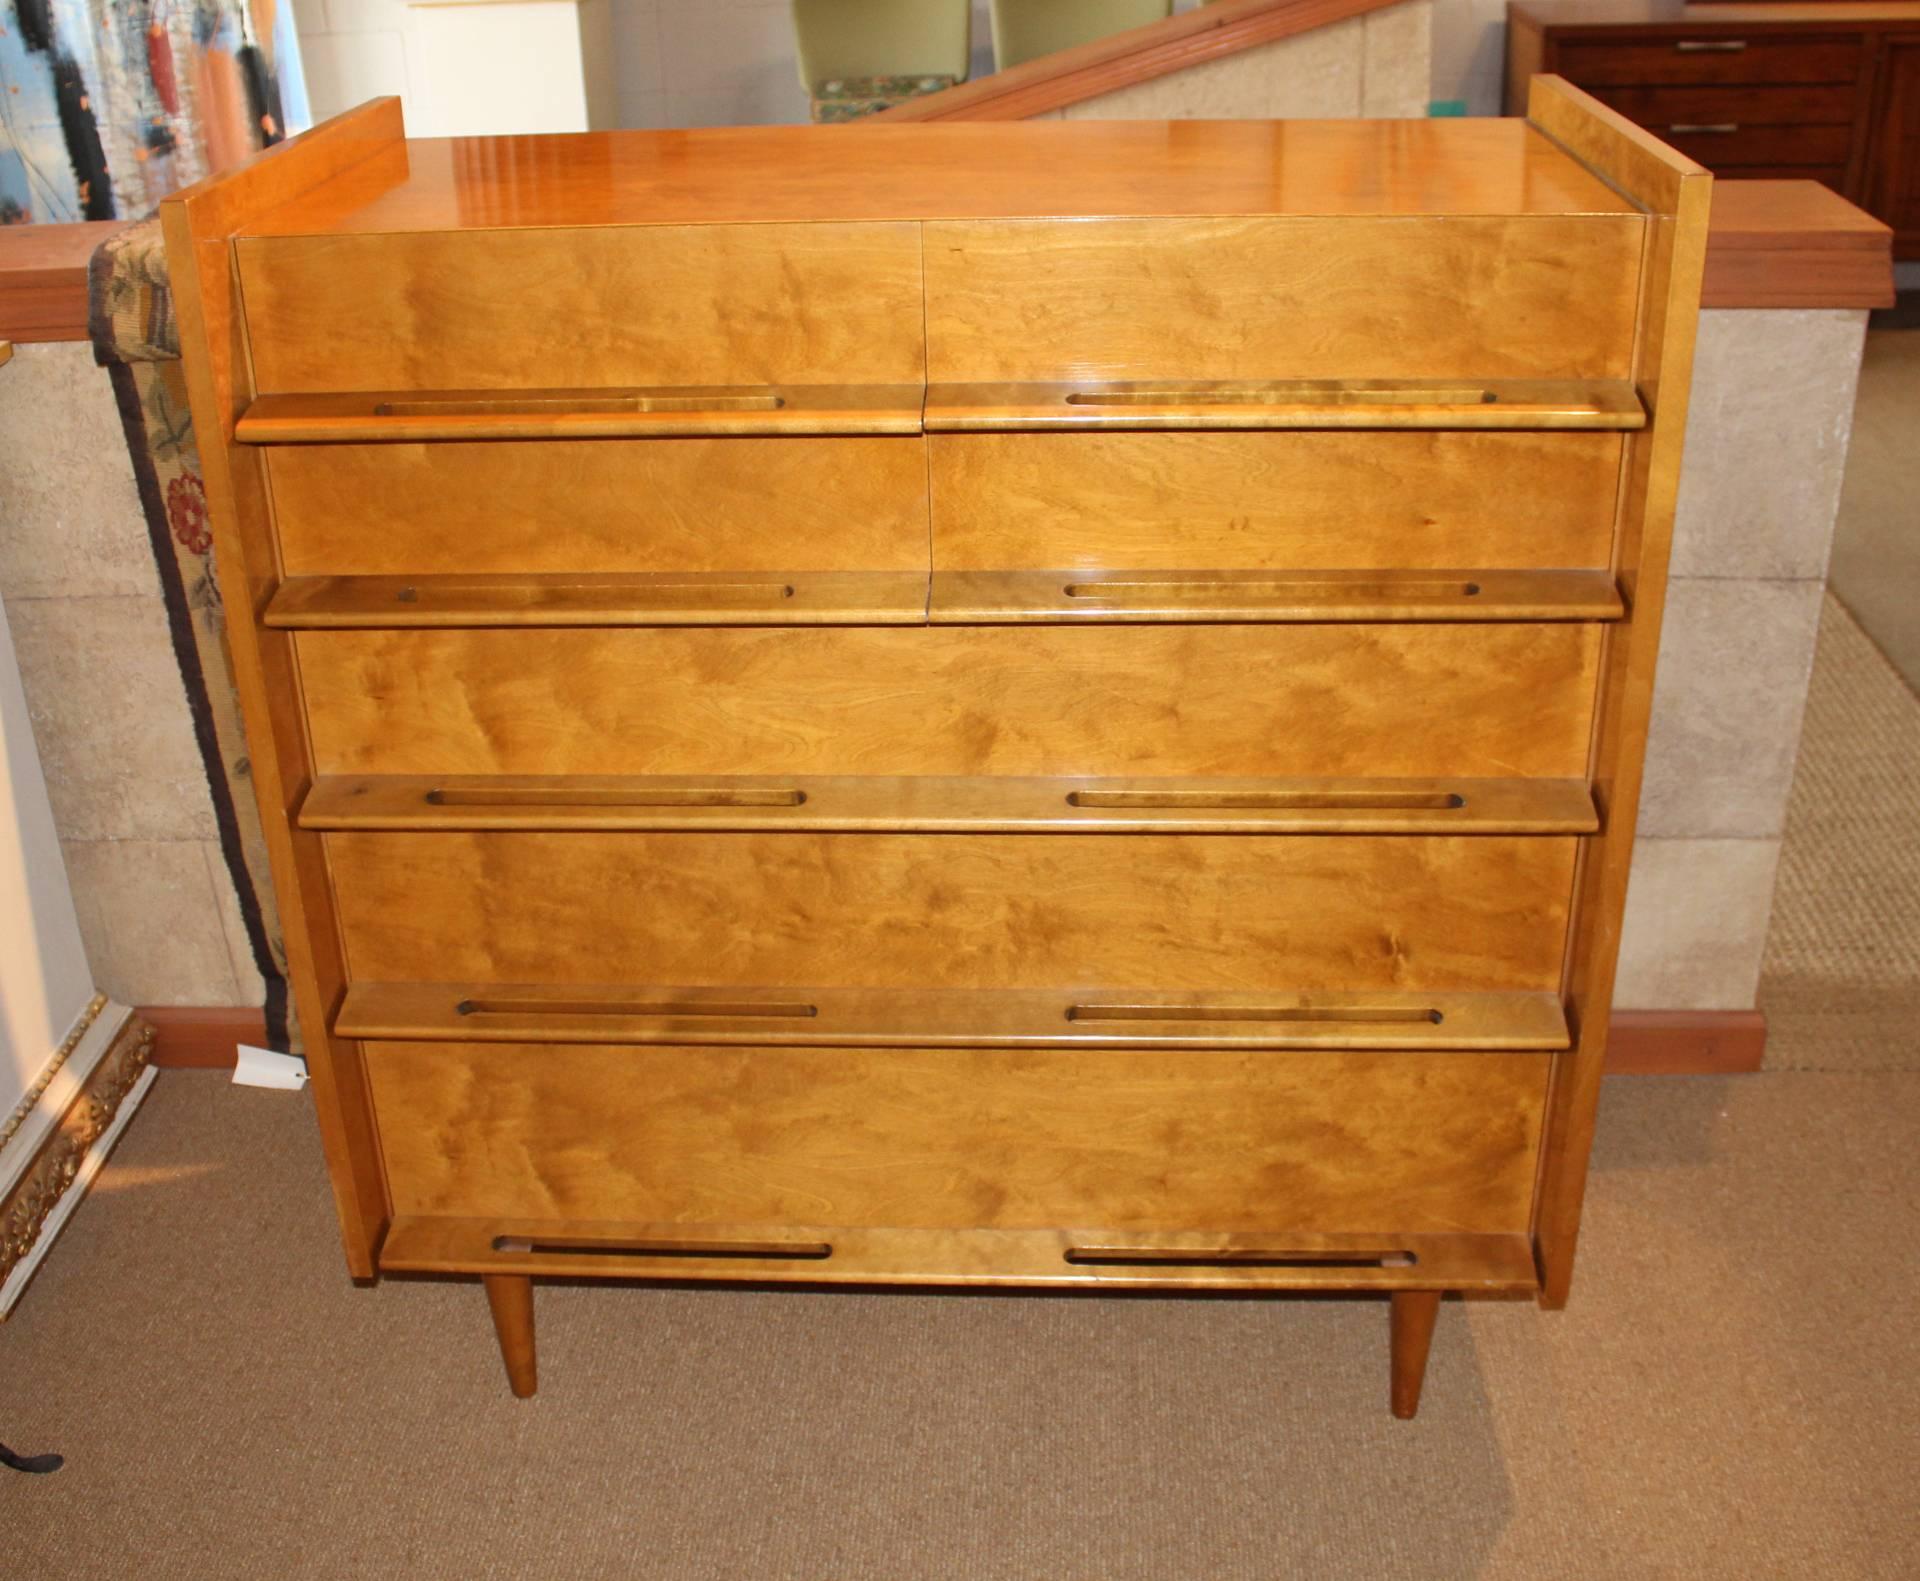 A seven-drawer chest of drawers from Edmond Spence's Coronation Collection for the Walpole Furniture Company from 1953. 

The implied volume of the bureau with its set back drawer faces, extended sideboards, tapered legs, sculpted pulls and raised